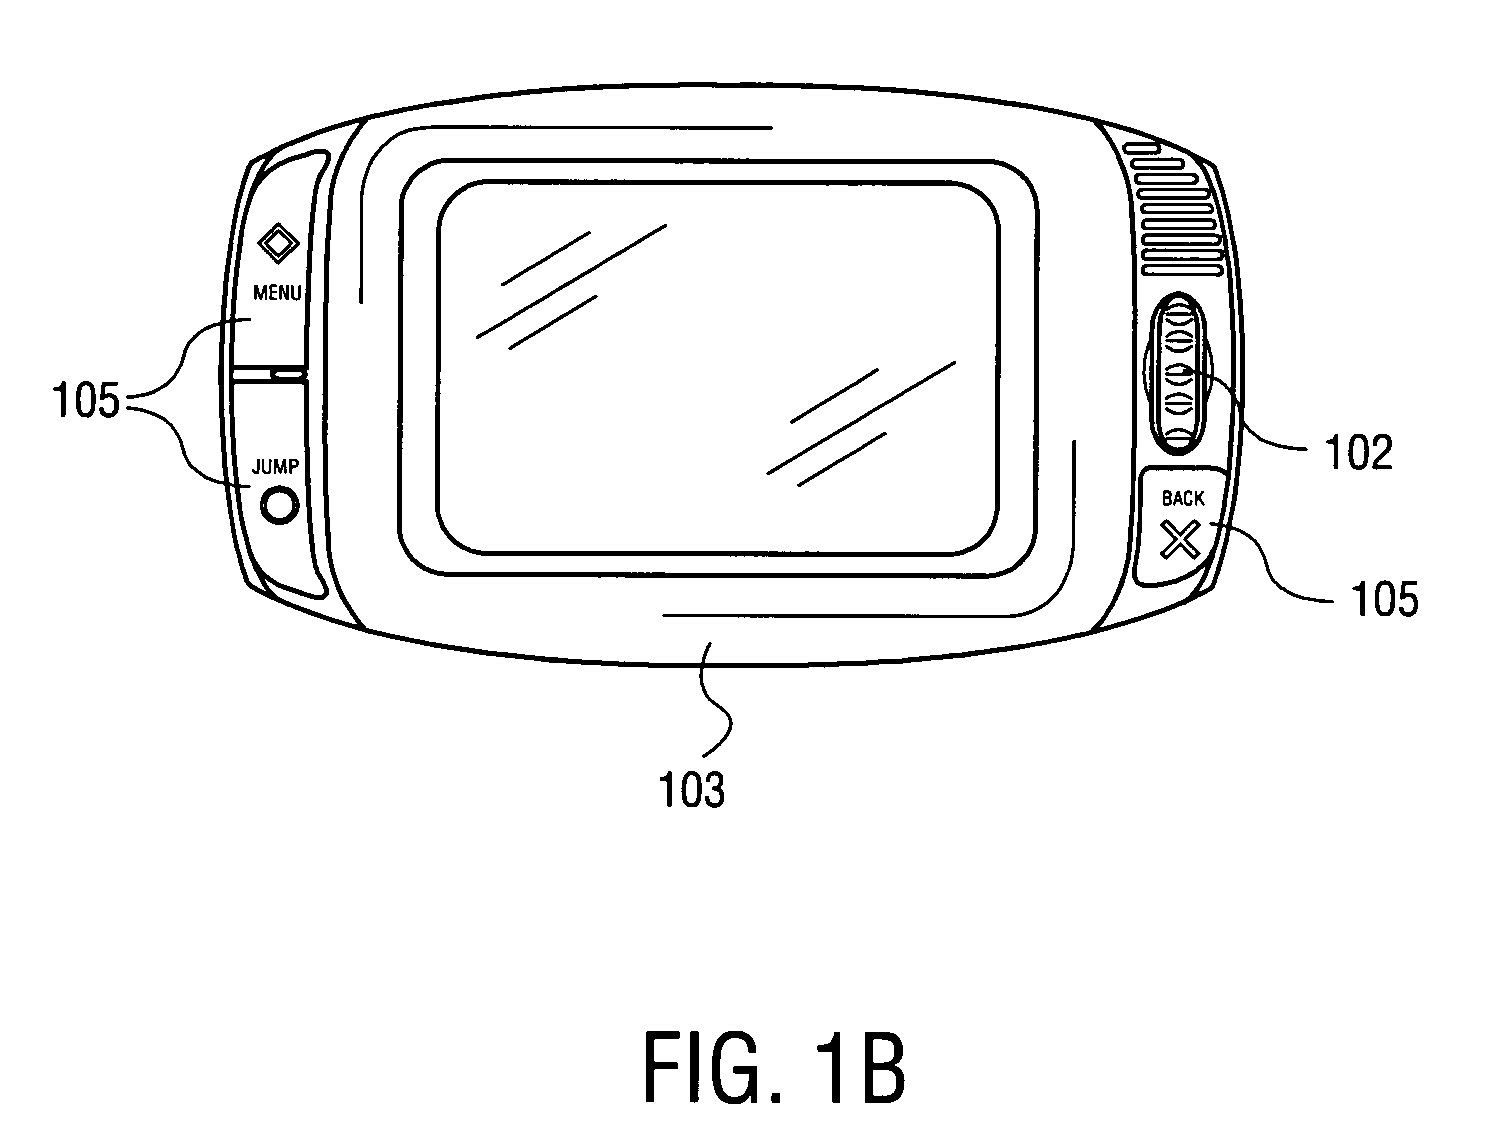 Multi-mode communication apparatus and interface for contacting a user